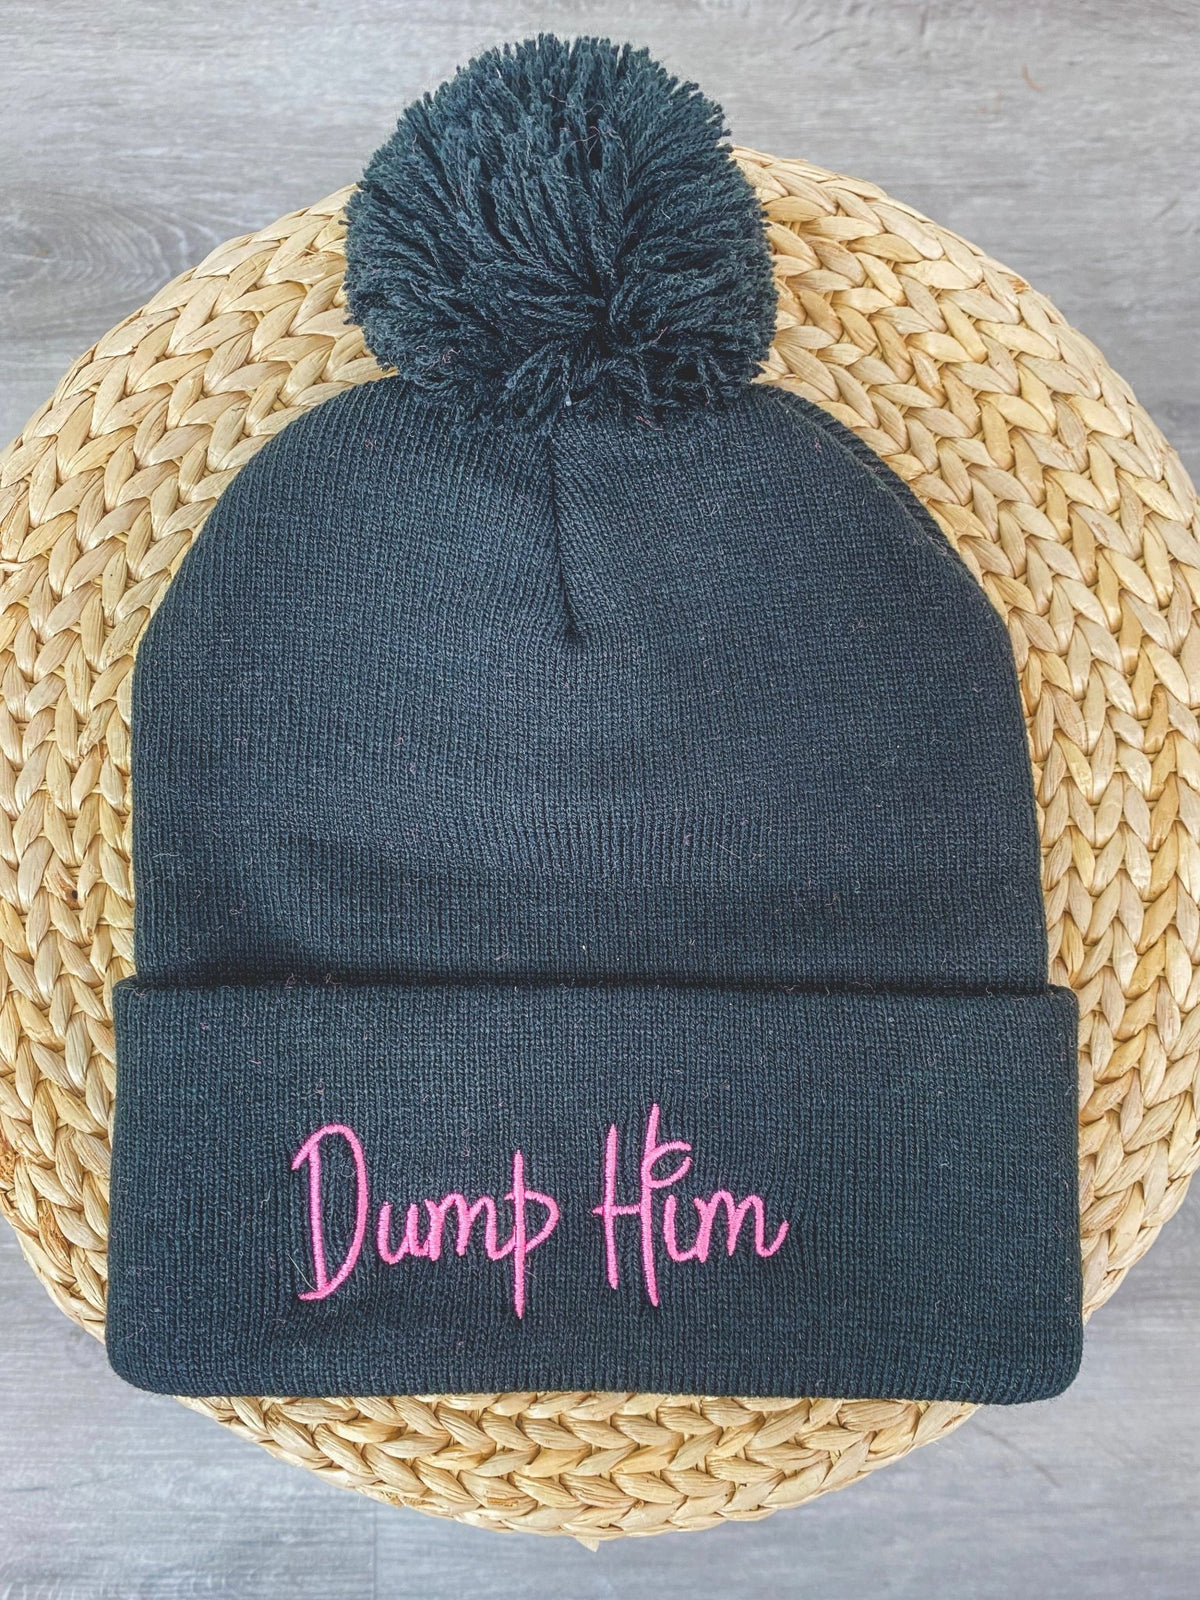 Dump him beanie pink/black - Trendy Beanies at Lush Fashion Lounge Boutique in Oklahoma City